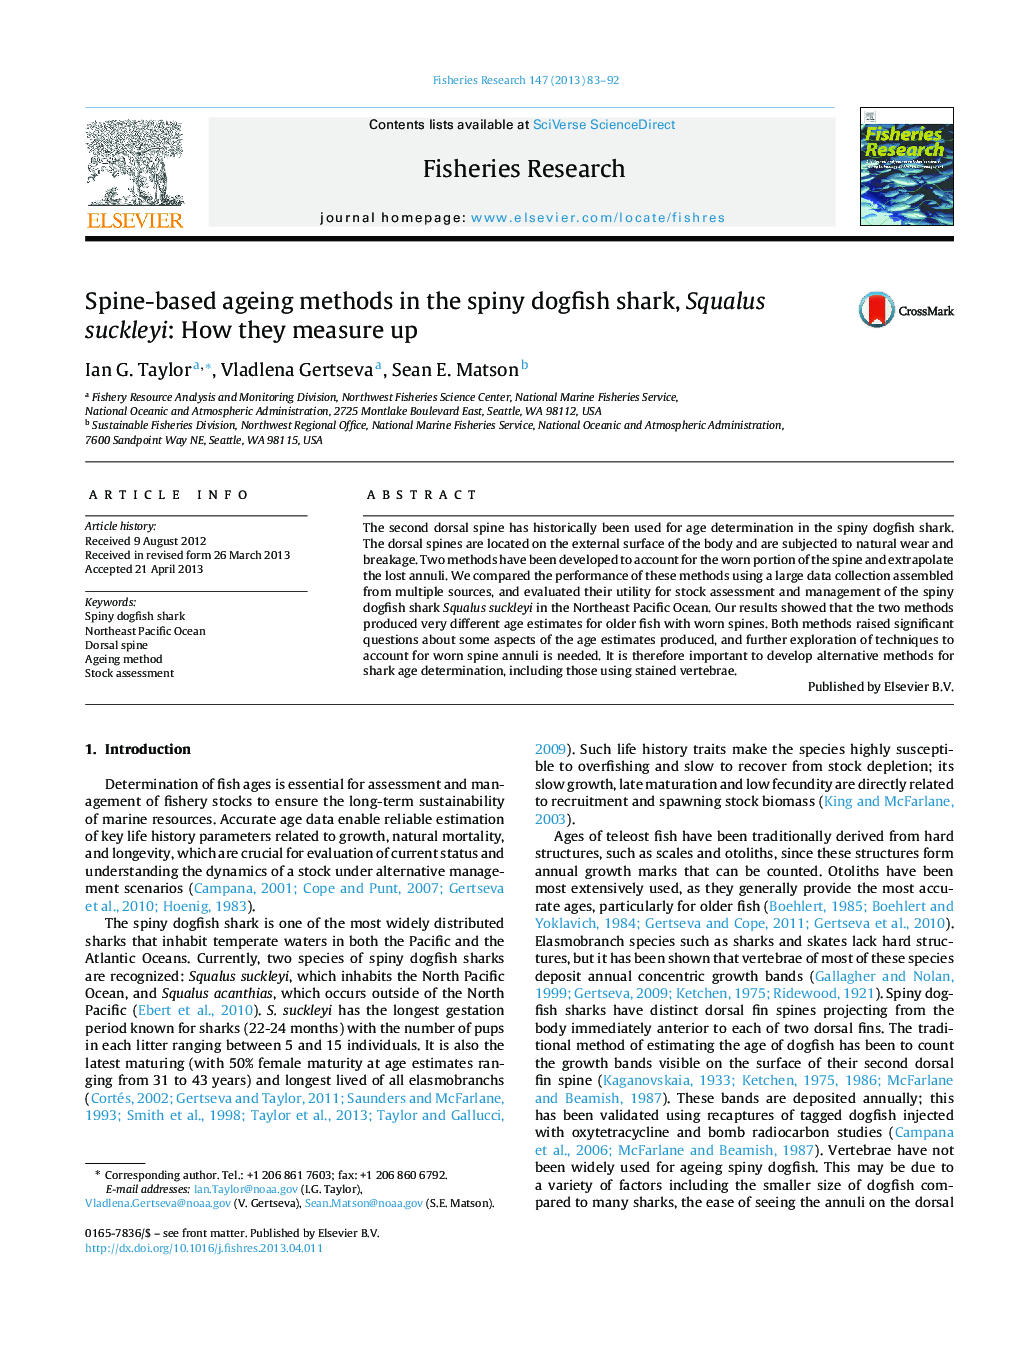 Spine-based ageing methods in the spiny dogfish shark, Squalus suckleyi: How they measure up